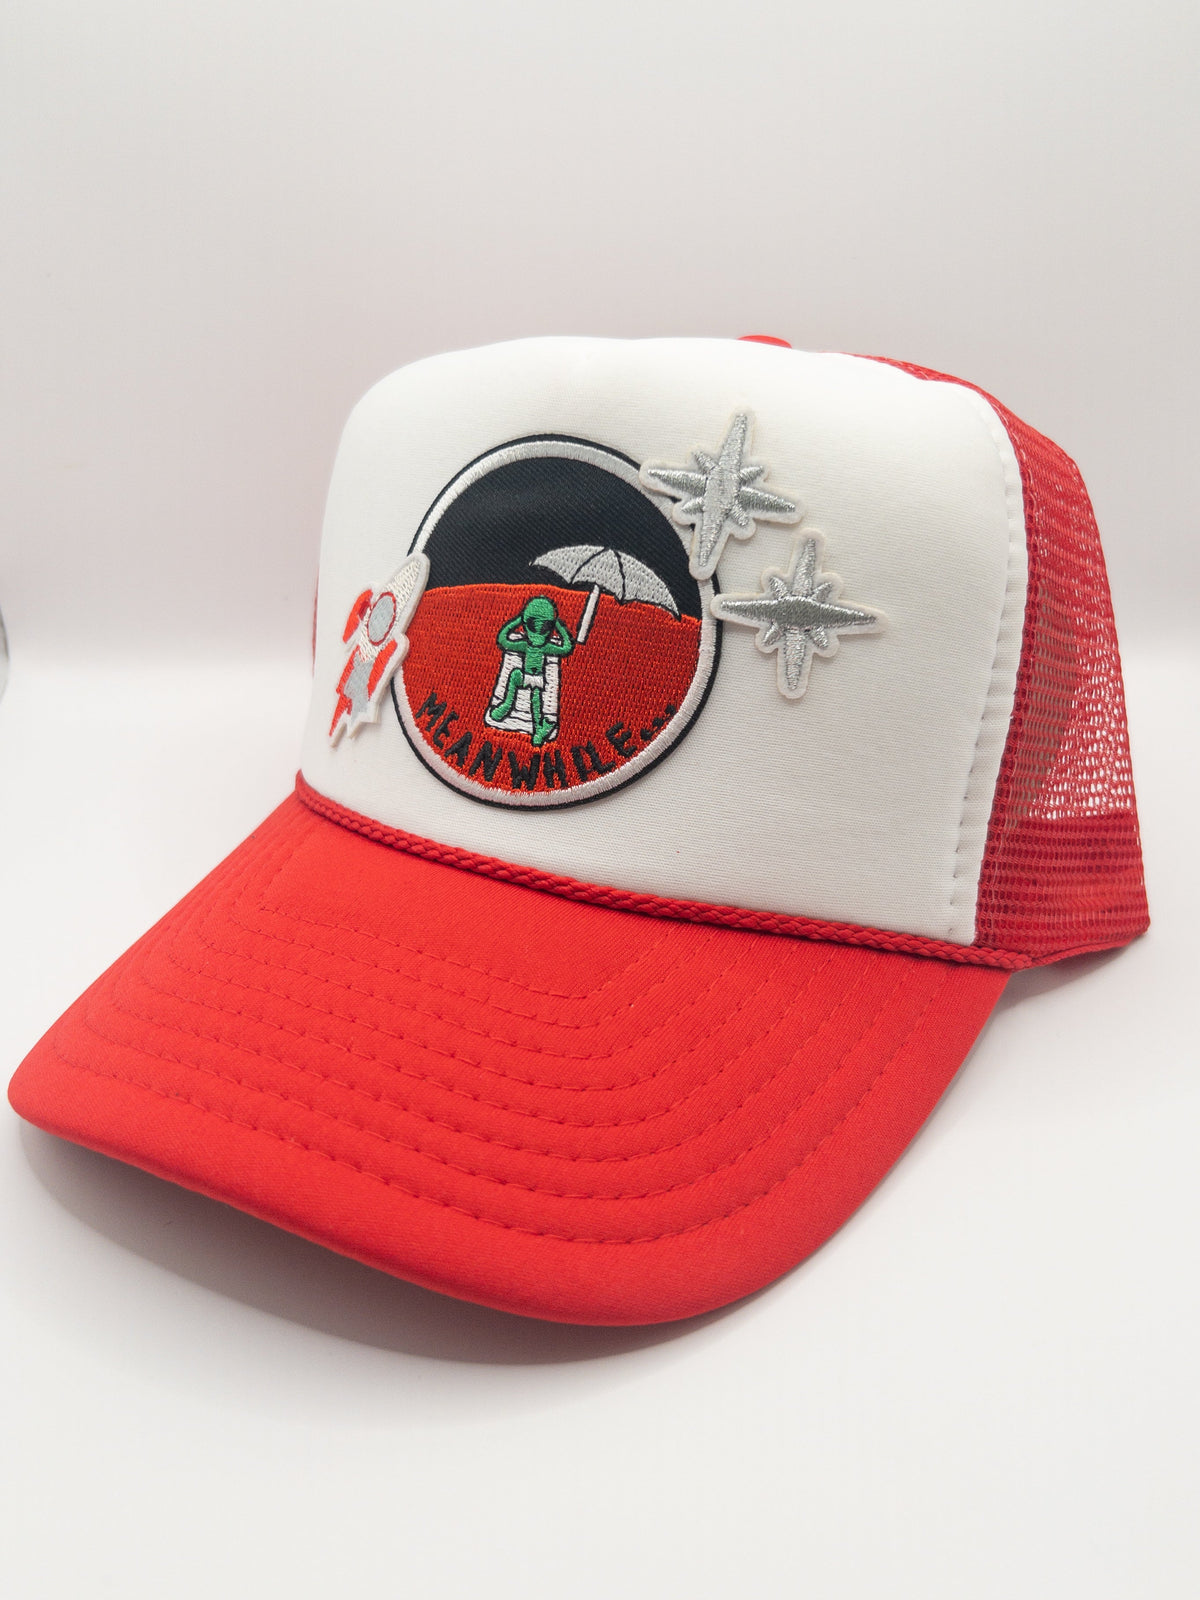 Meanwhile Space Cowboy Hat | Patch Trucker Hat | Red and White Trucker Hat Hats TheFringeCultureCollective